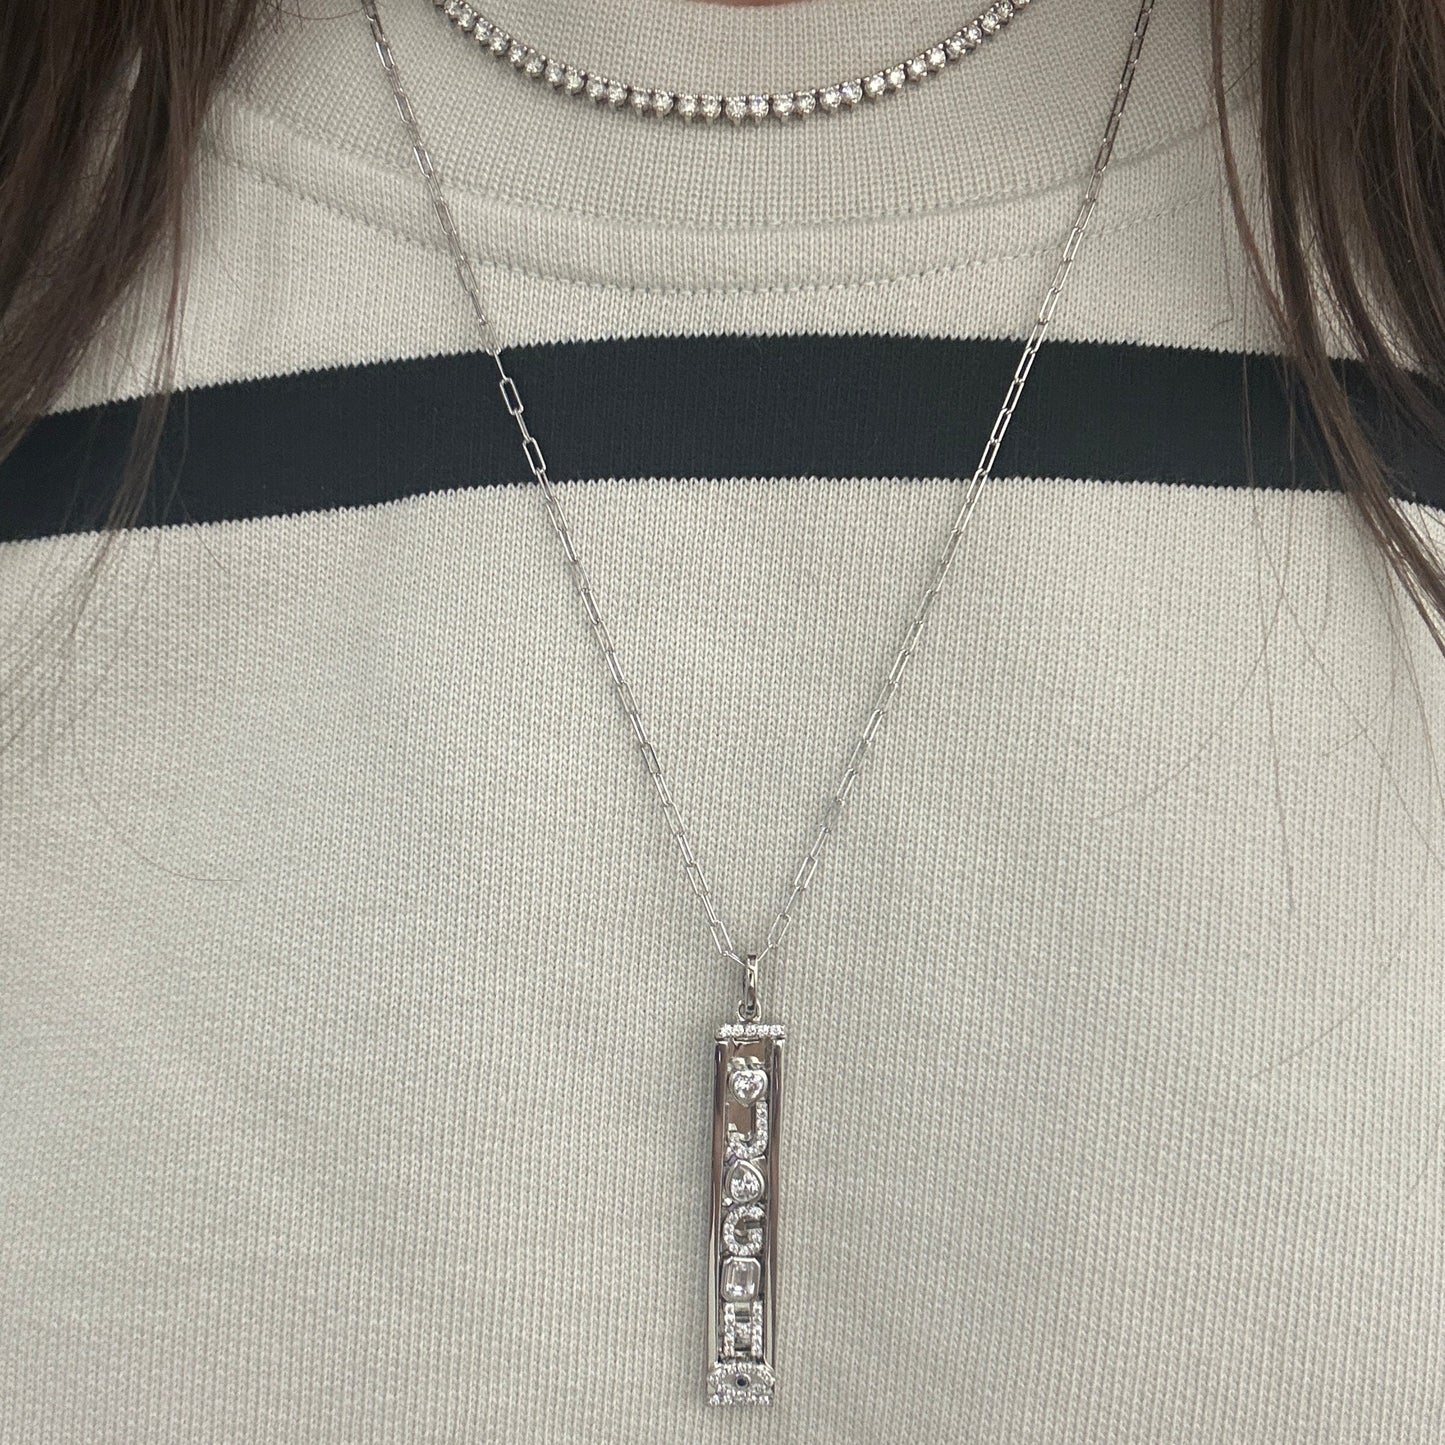 Letters and Charms (Pendant sold separately)